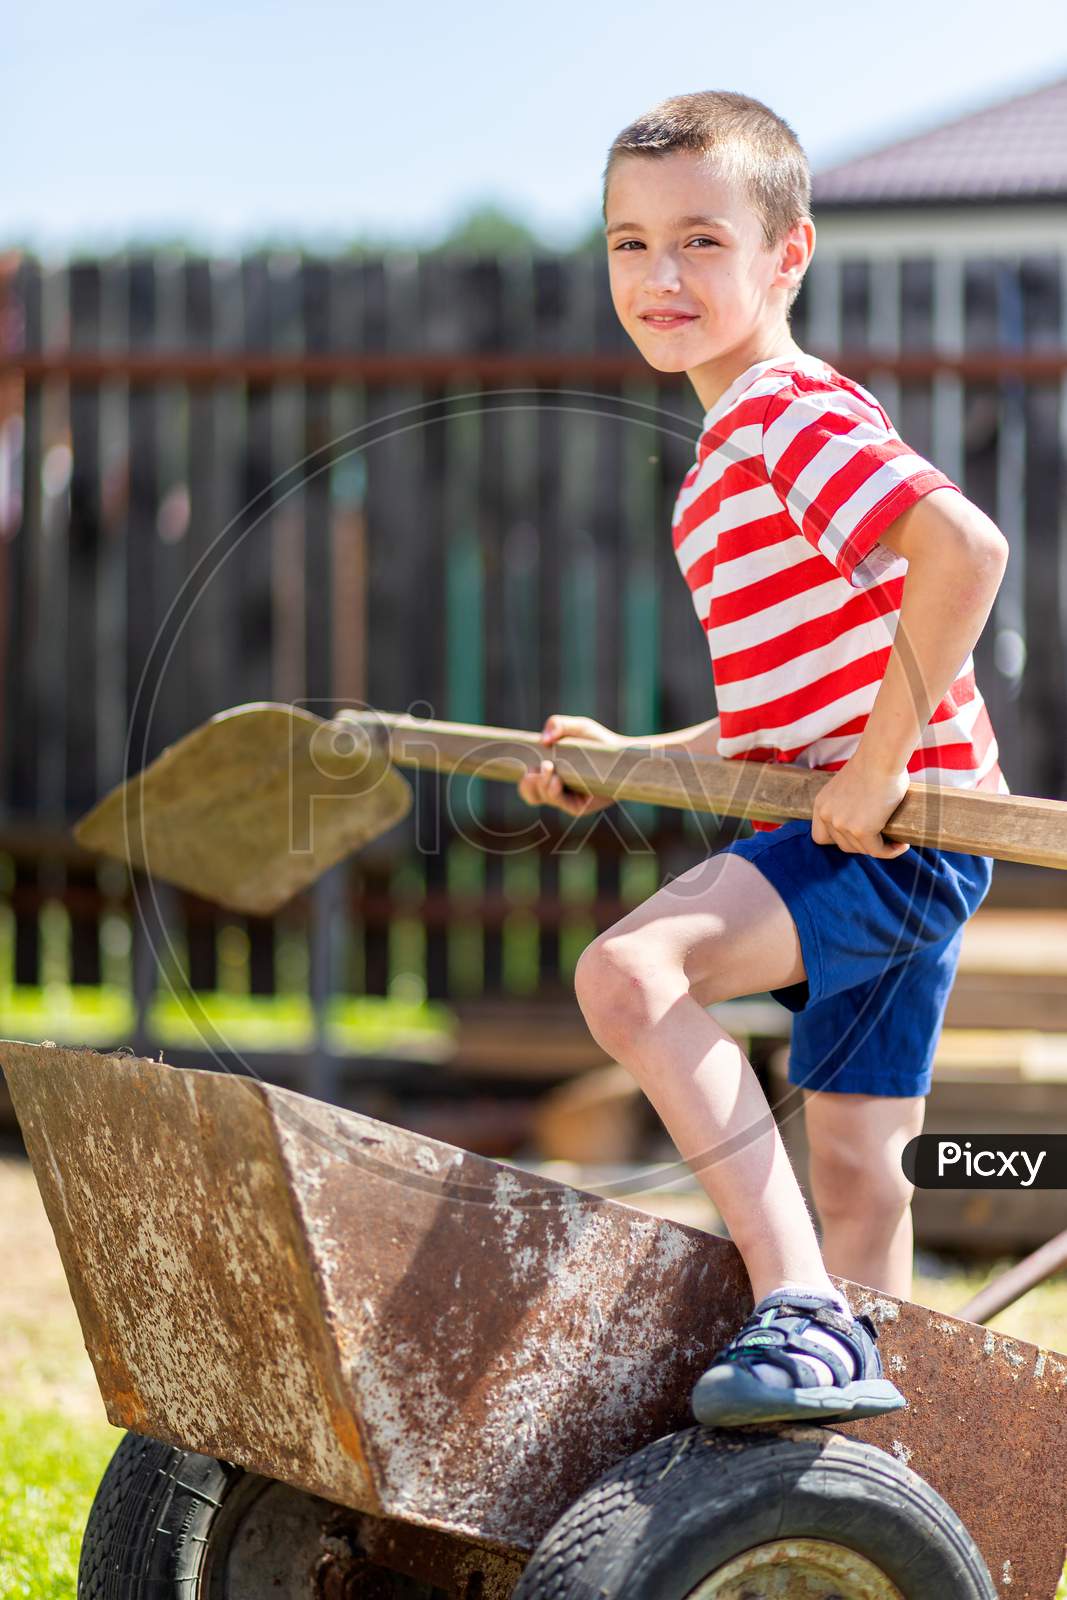 A Little Cheerful Boy Sits On A Garden Wheelbarrow And Holds A Shovel In His Hand In The Garden Of A Country House. Little Boy Helper Ready To Dig